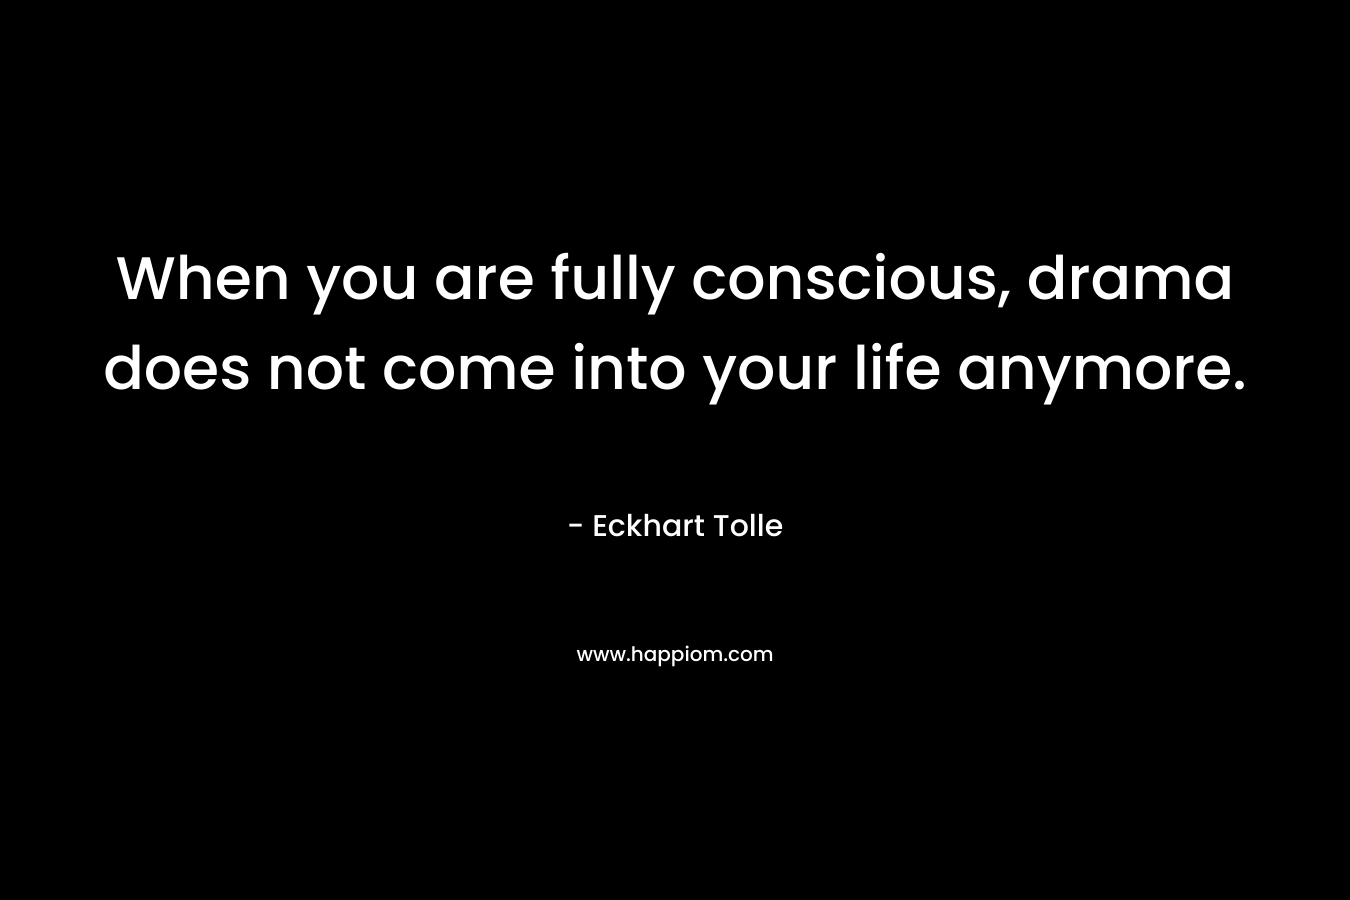 When you are fully conscious, drama does not come into your life anymore. – Eckhart Tolle